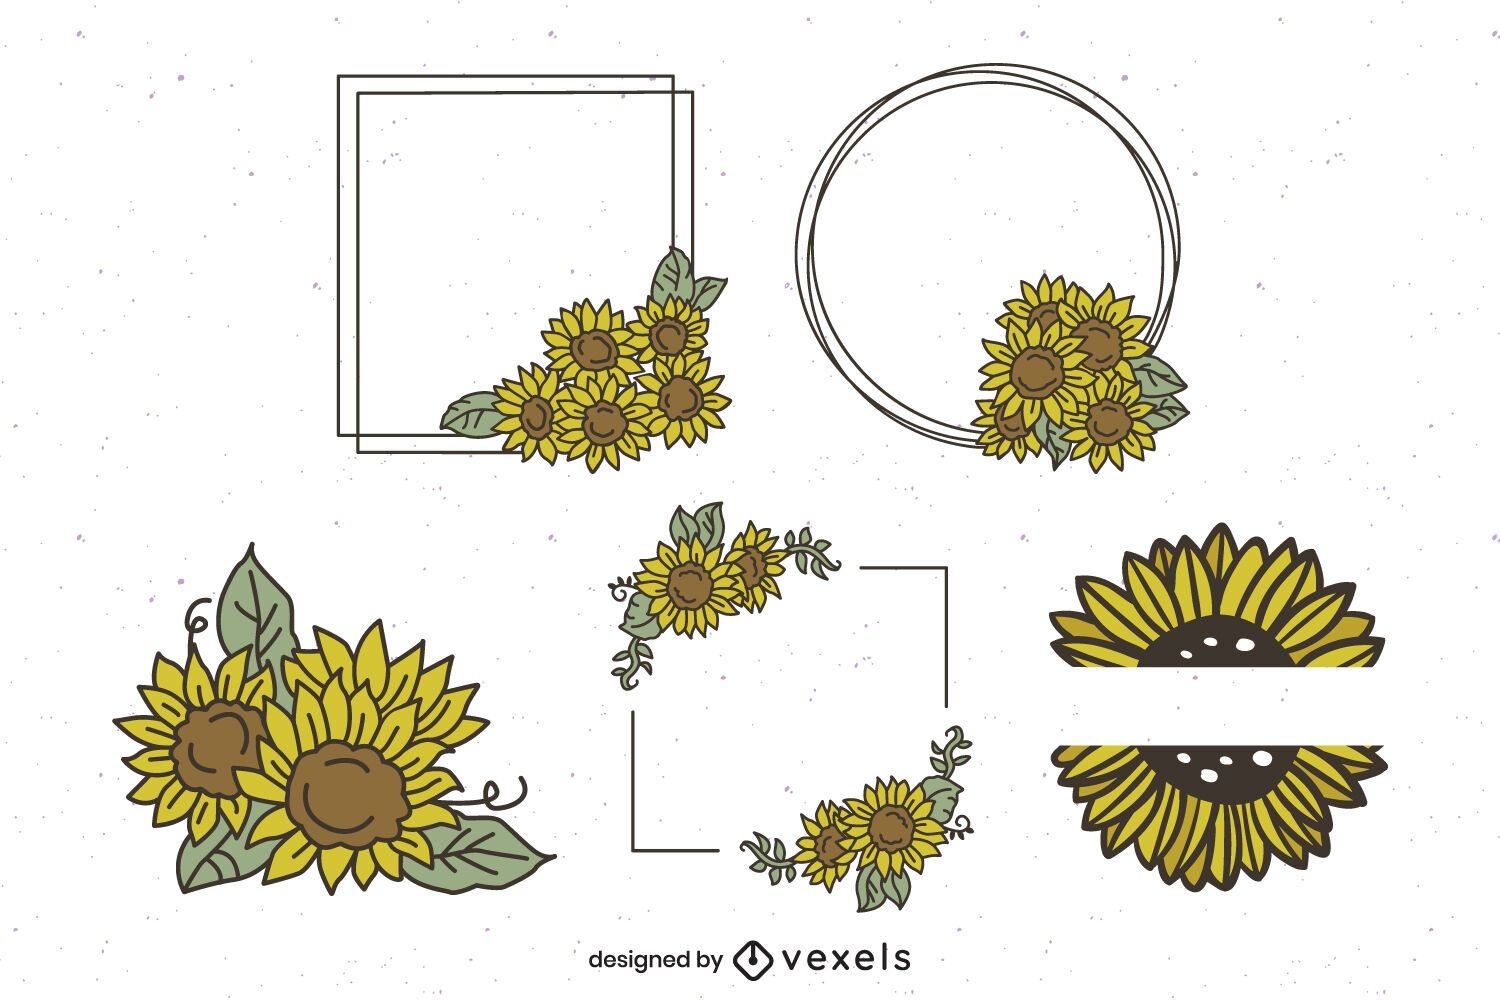 Sunflower frames and ornaments pack